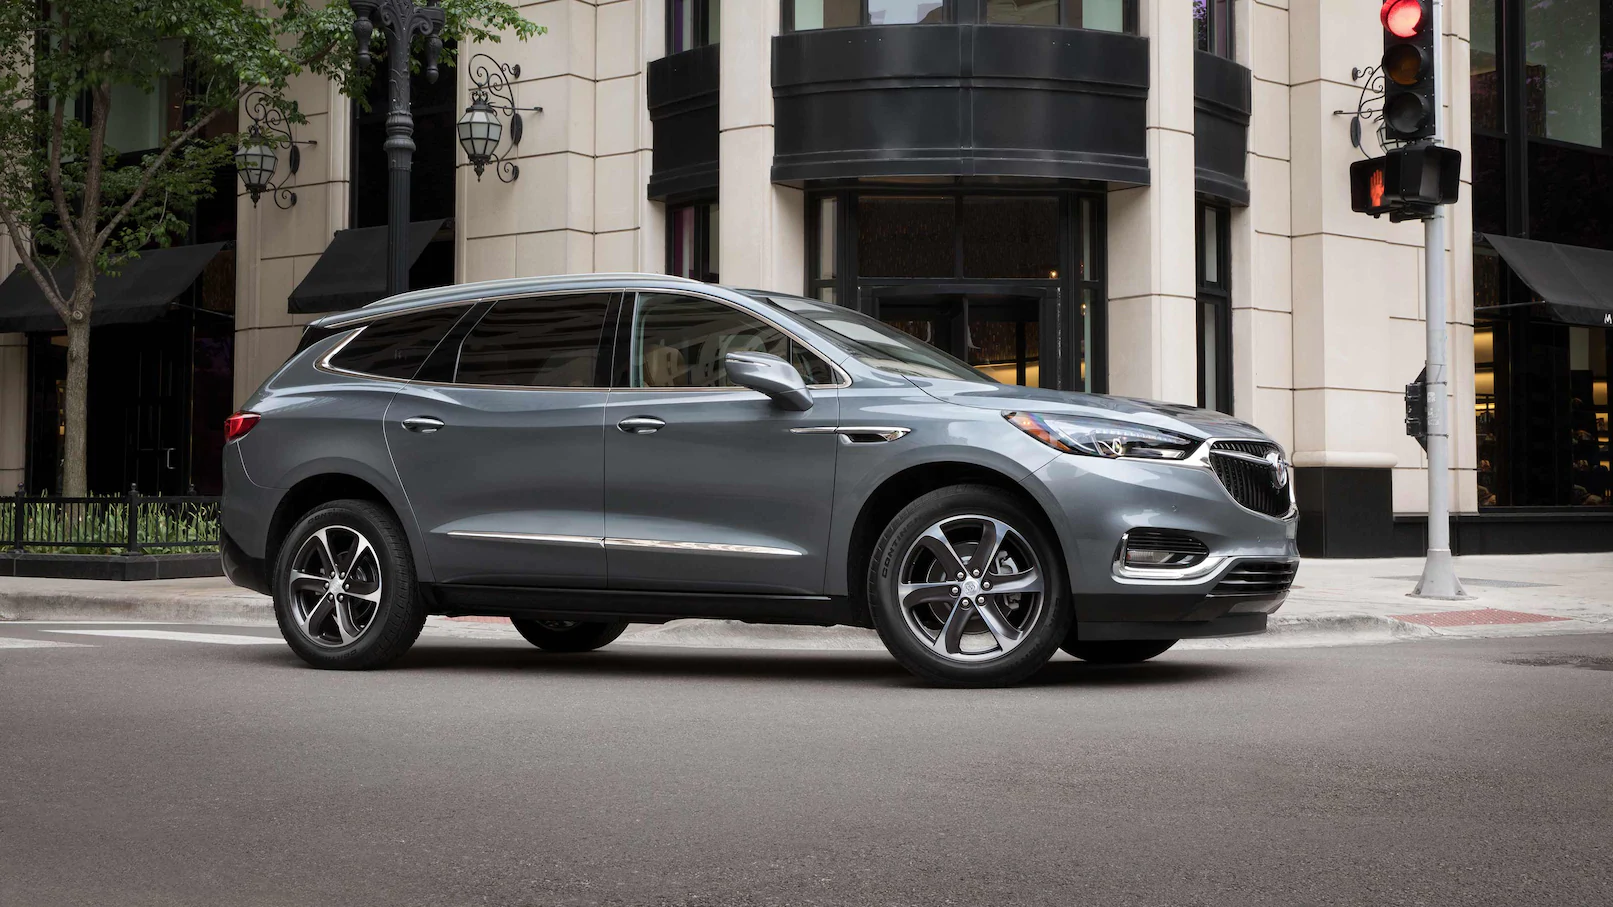 2021 Buick Enclave at Valley Buick GMC